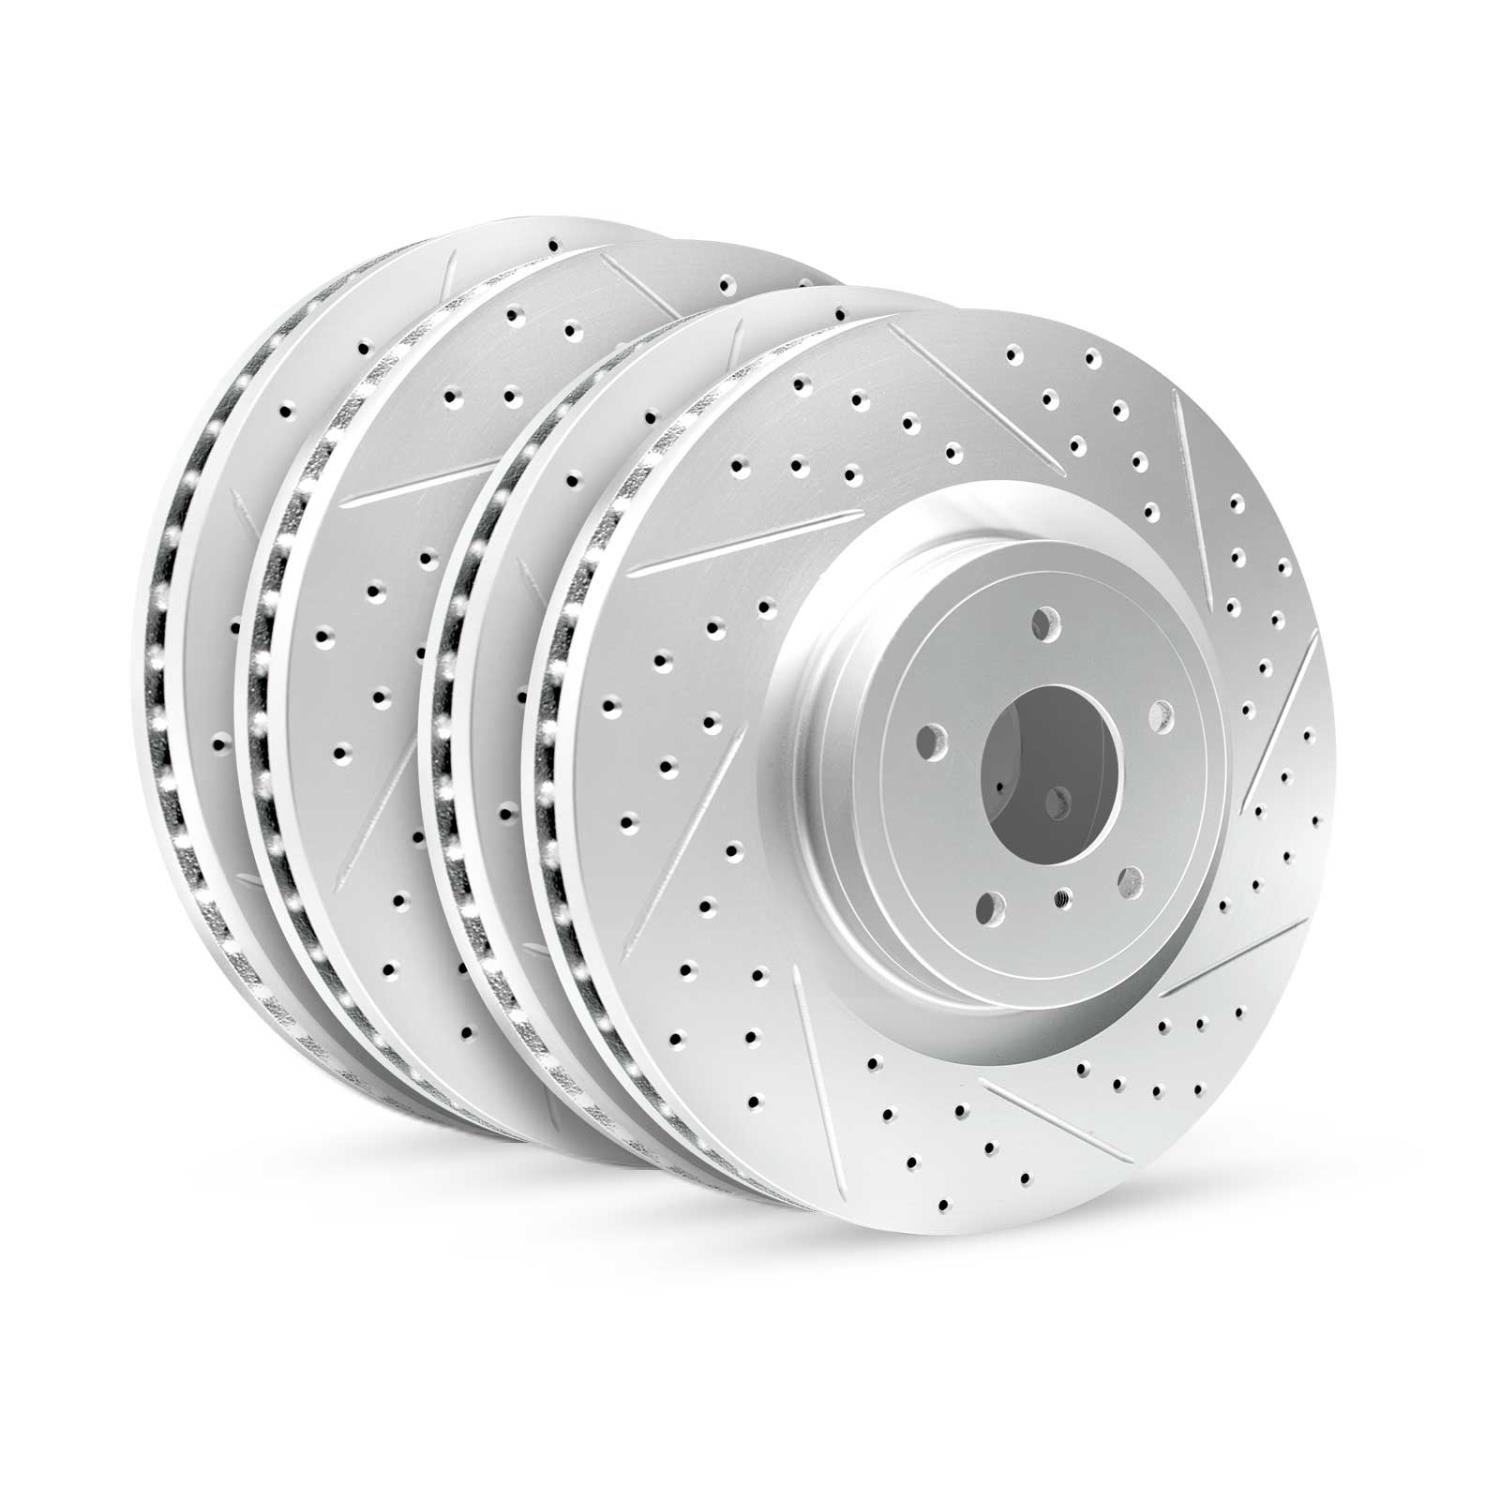 GEO-Carbon Drilled/Slotted Rotors, 2004-2009 Kia/Hyundai/Genesis, Position: Front/Rear